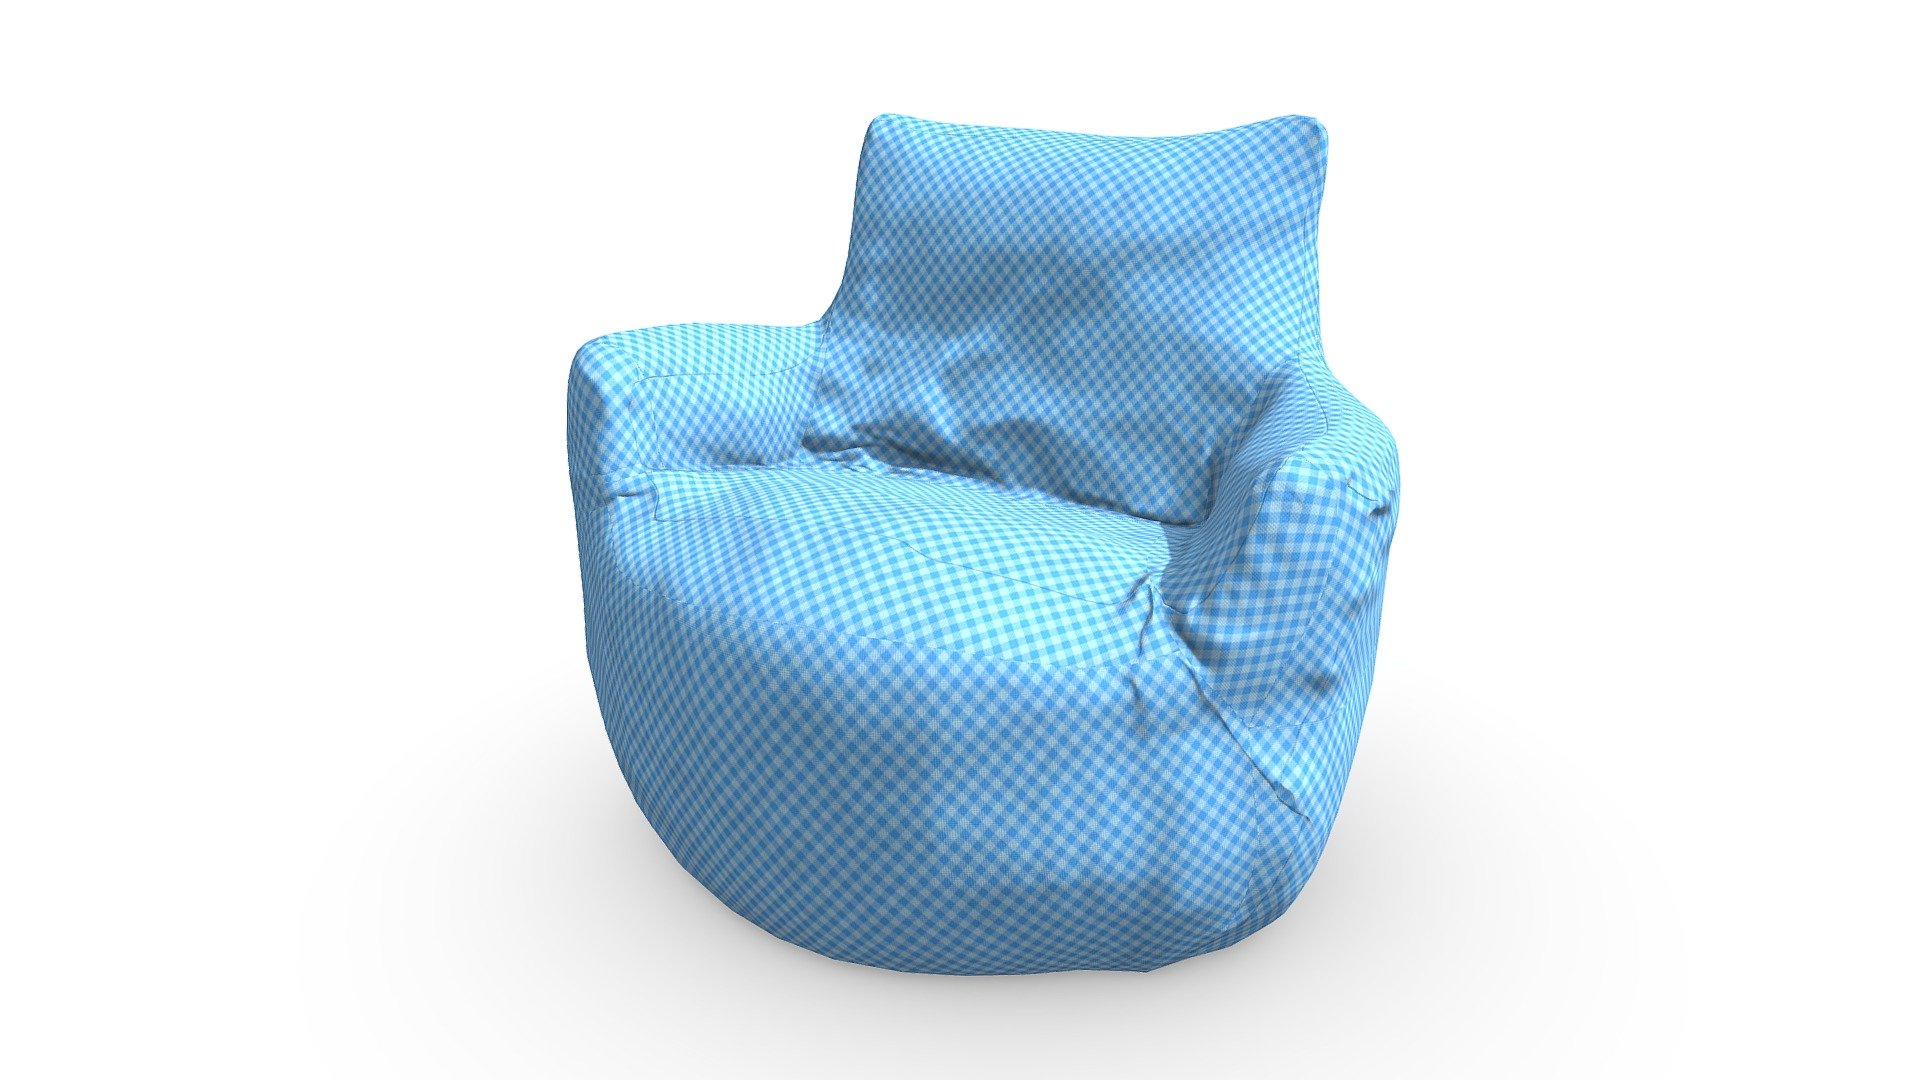 Bean Bag. Inside out brings to you highly detailed, optimized, with PBR materials. Can be used for any project and platform. AR, VR, Anroid, IOS, PC, etc. All maps albedo, normal, roughness, aoc, metallic and height are perfectly created with love and care and optimized for all platforms. Ready to be used in unity or unreal or any other engine.

*All textures are included in the package.

Features: - PBR validated - Super optimized 3D models - HD textures to boost every single detail - VR ready - AR ready - 4k Textures - Arm Chair Bean Bag - Buy Royalty Free 3D model by Inside Out Art (@ranajitdas) 3d model